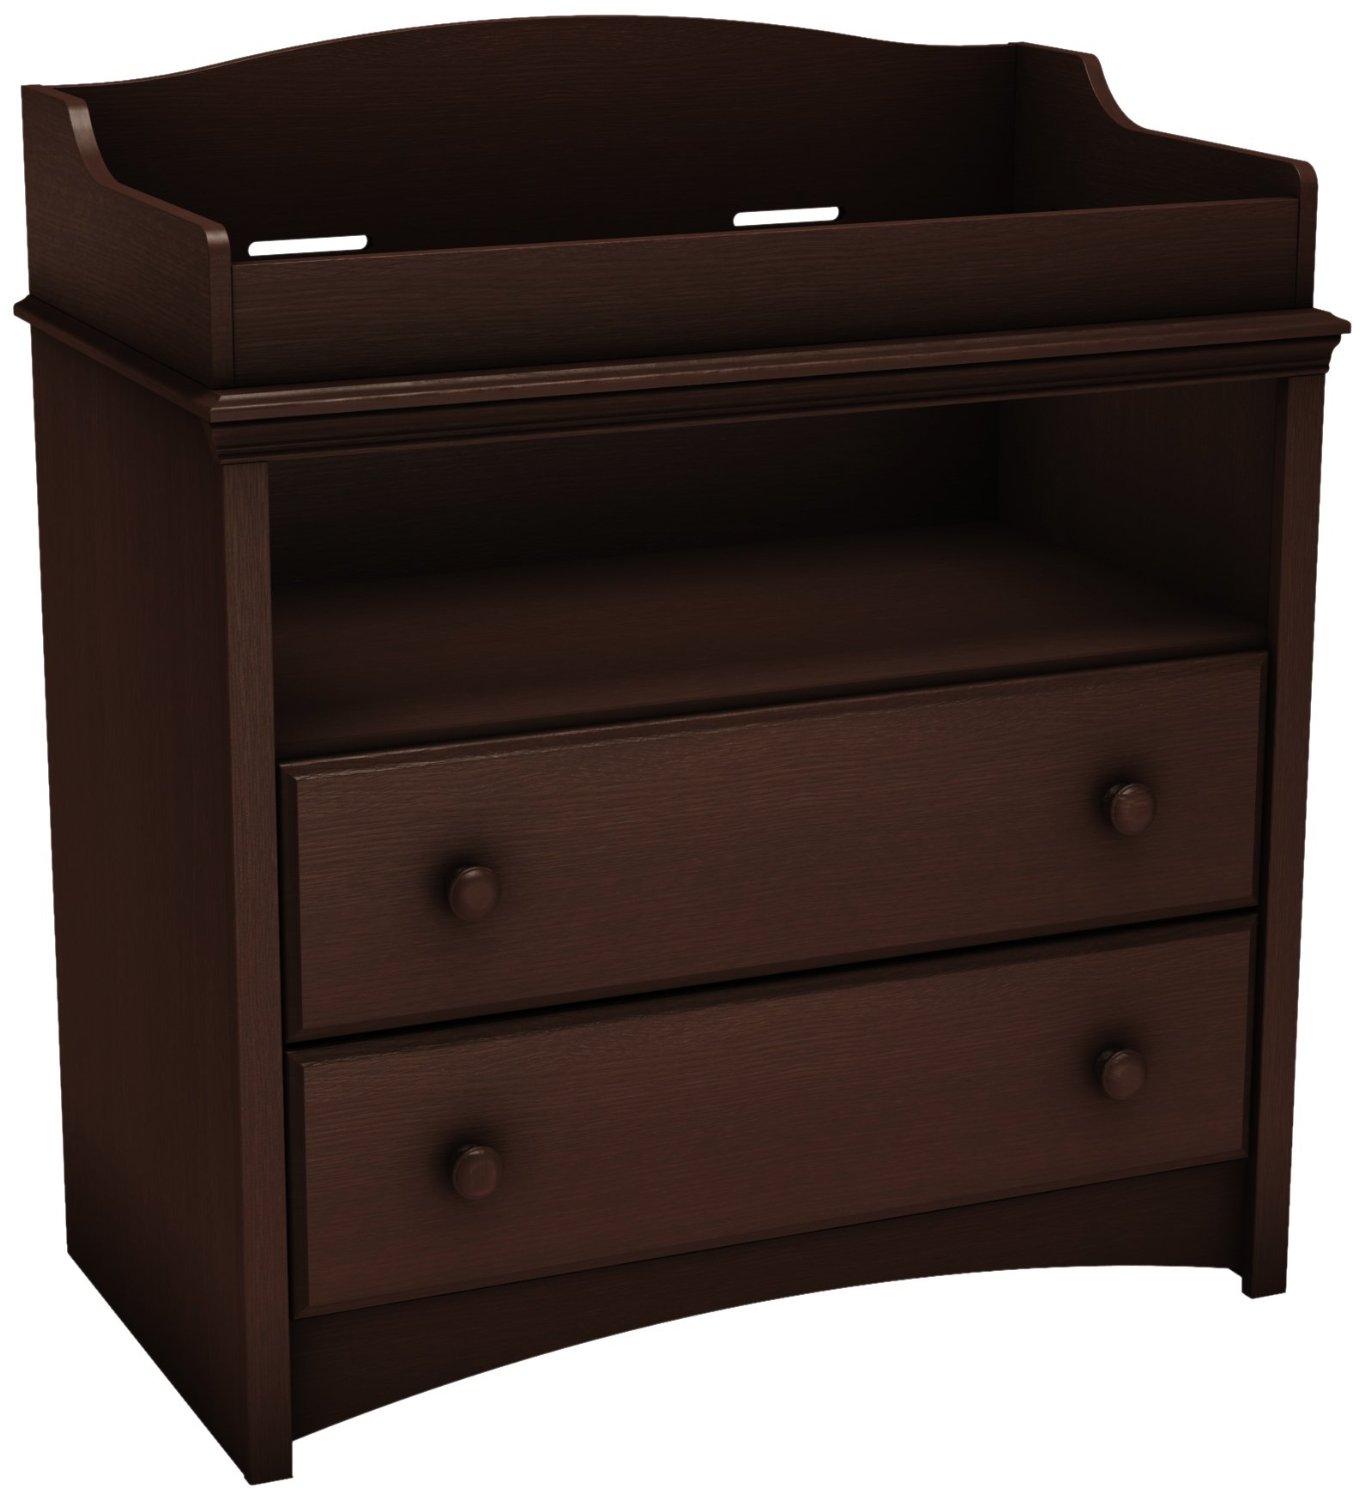 south shore angel changing table, espresso wood changing table, dark wood changing table, wood changing table, best changing tables with drawers, changing tables with drawers, traditional changing table